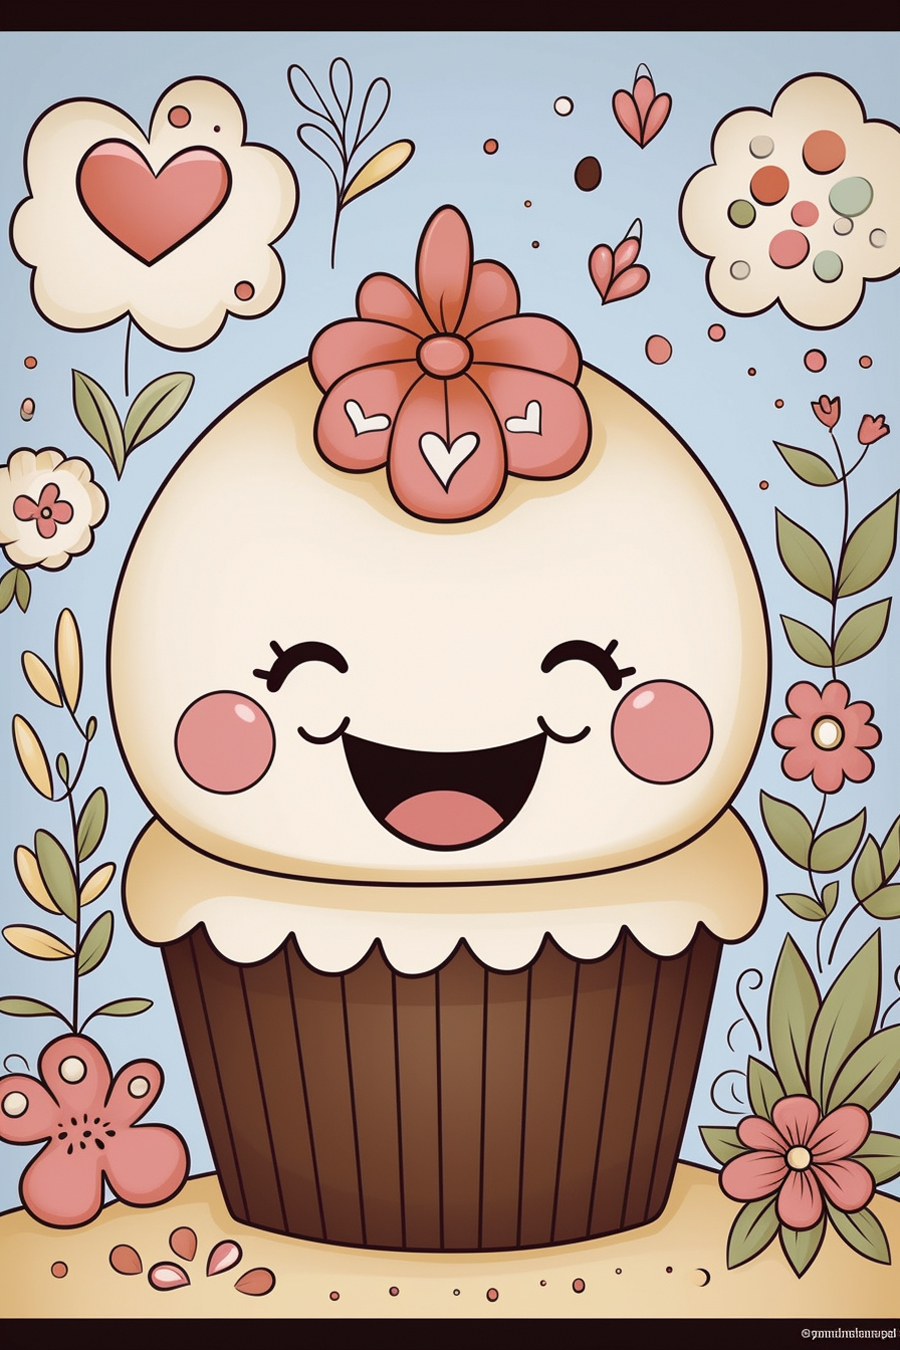 A cartoon cupcake with flowers and hearts.